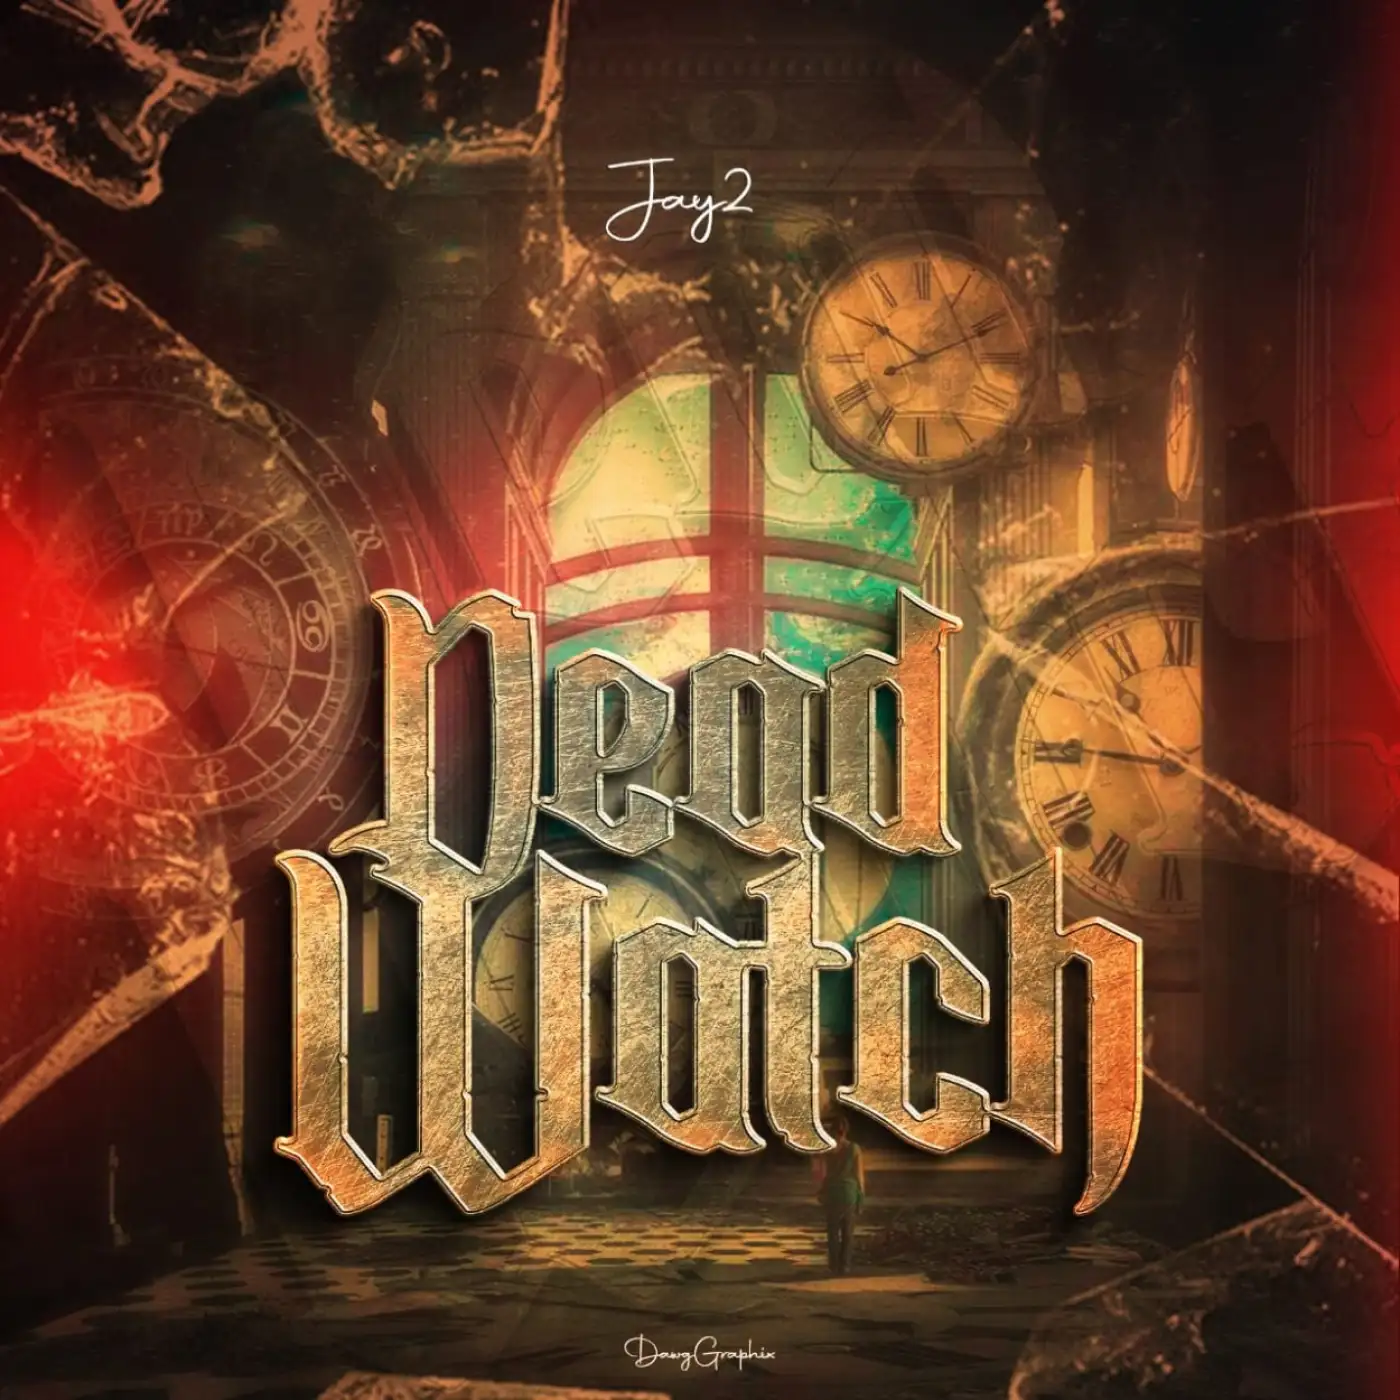 Jay2-Jay2 - Dead Watch-song artwork cover